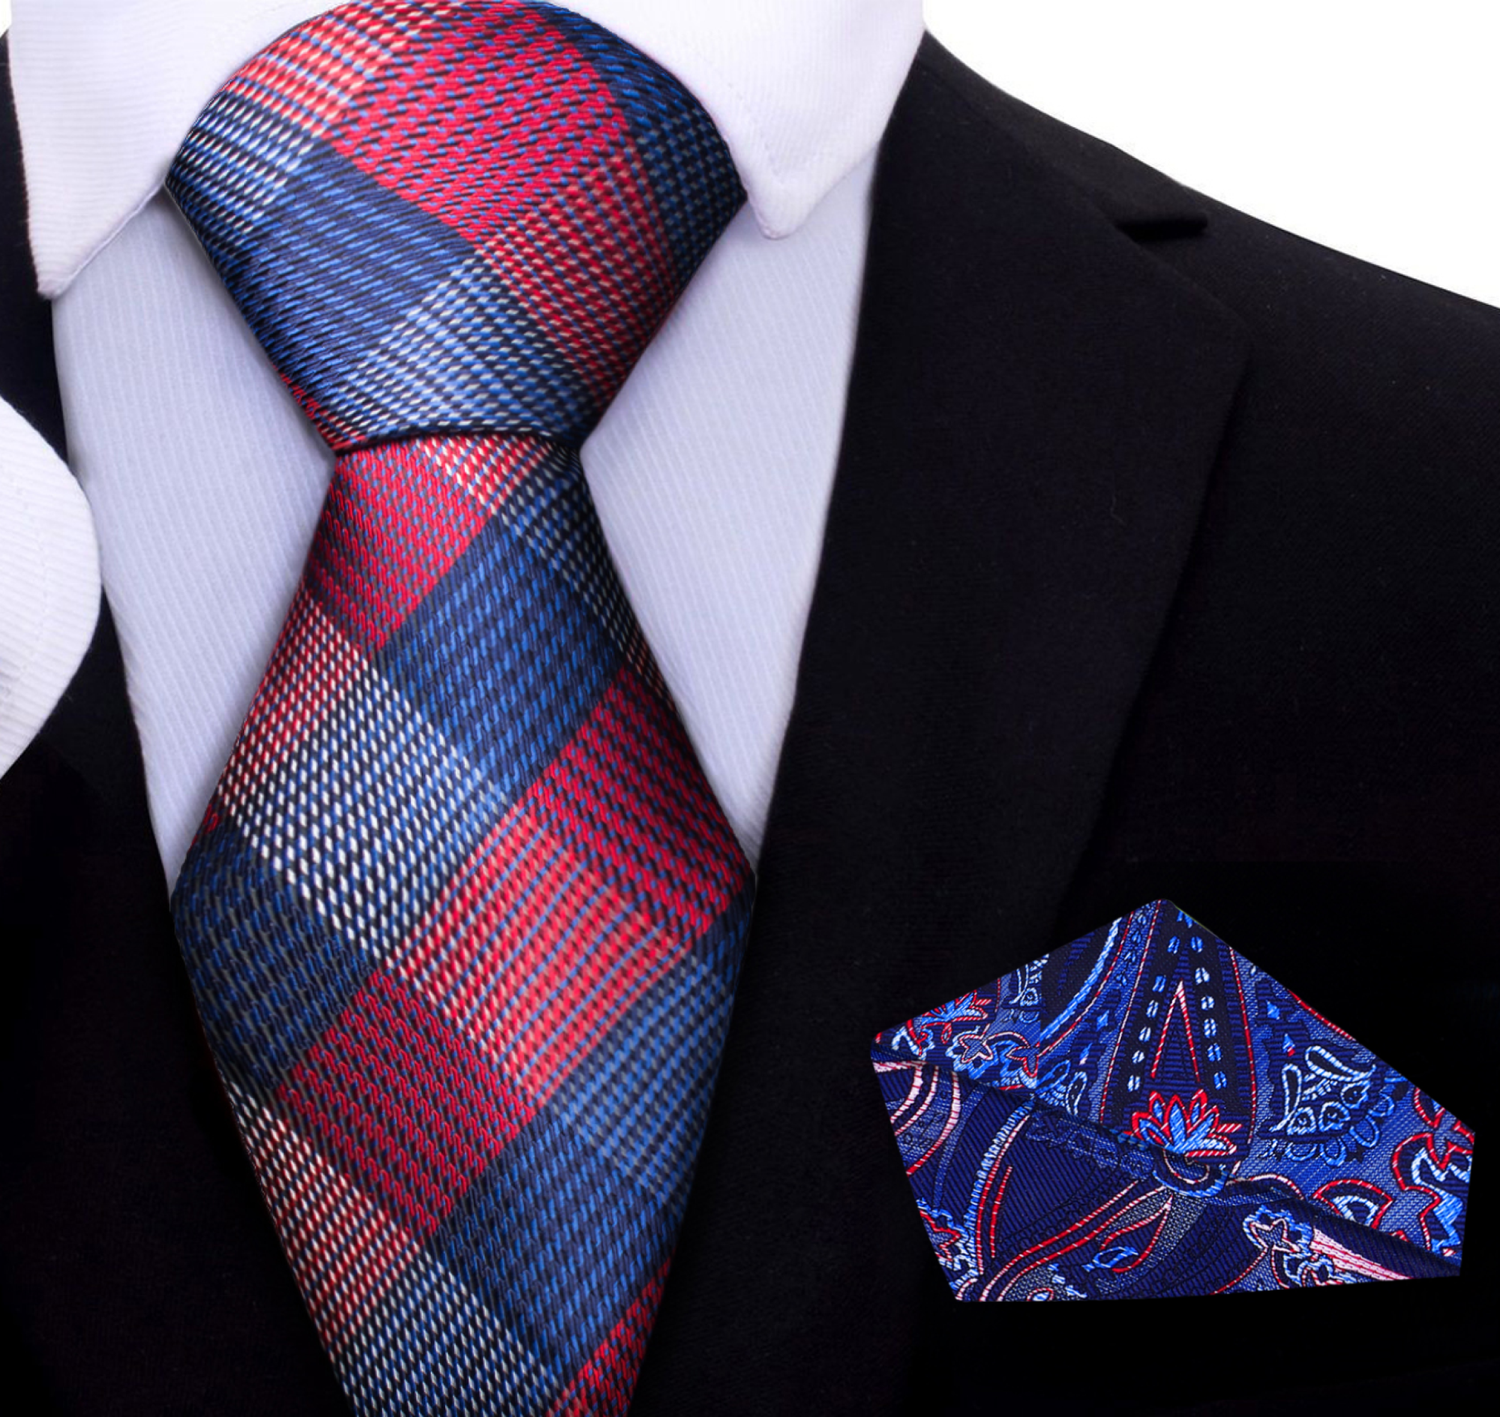 Red and Blue Plaid Tie and Blue and Red Paisley Pocket Square